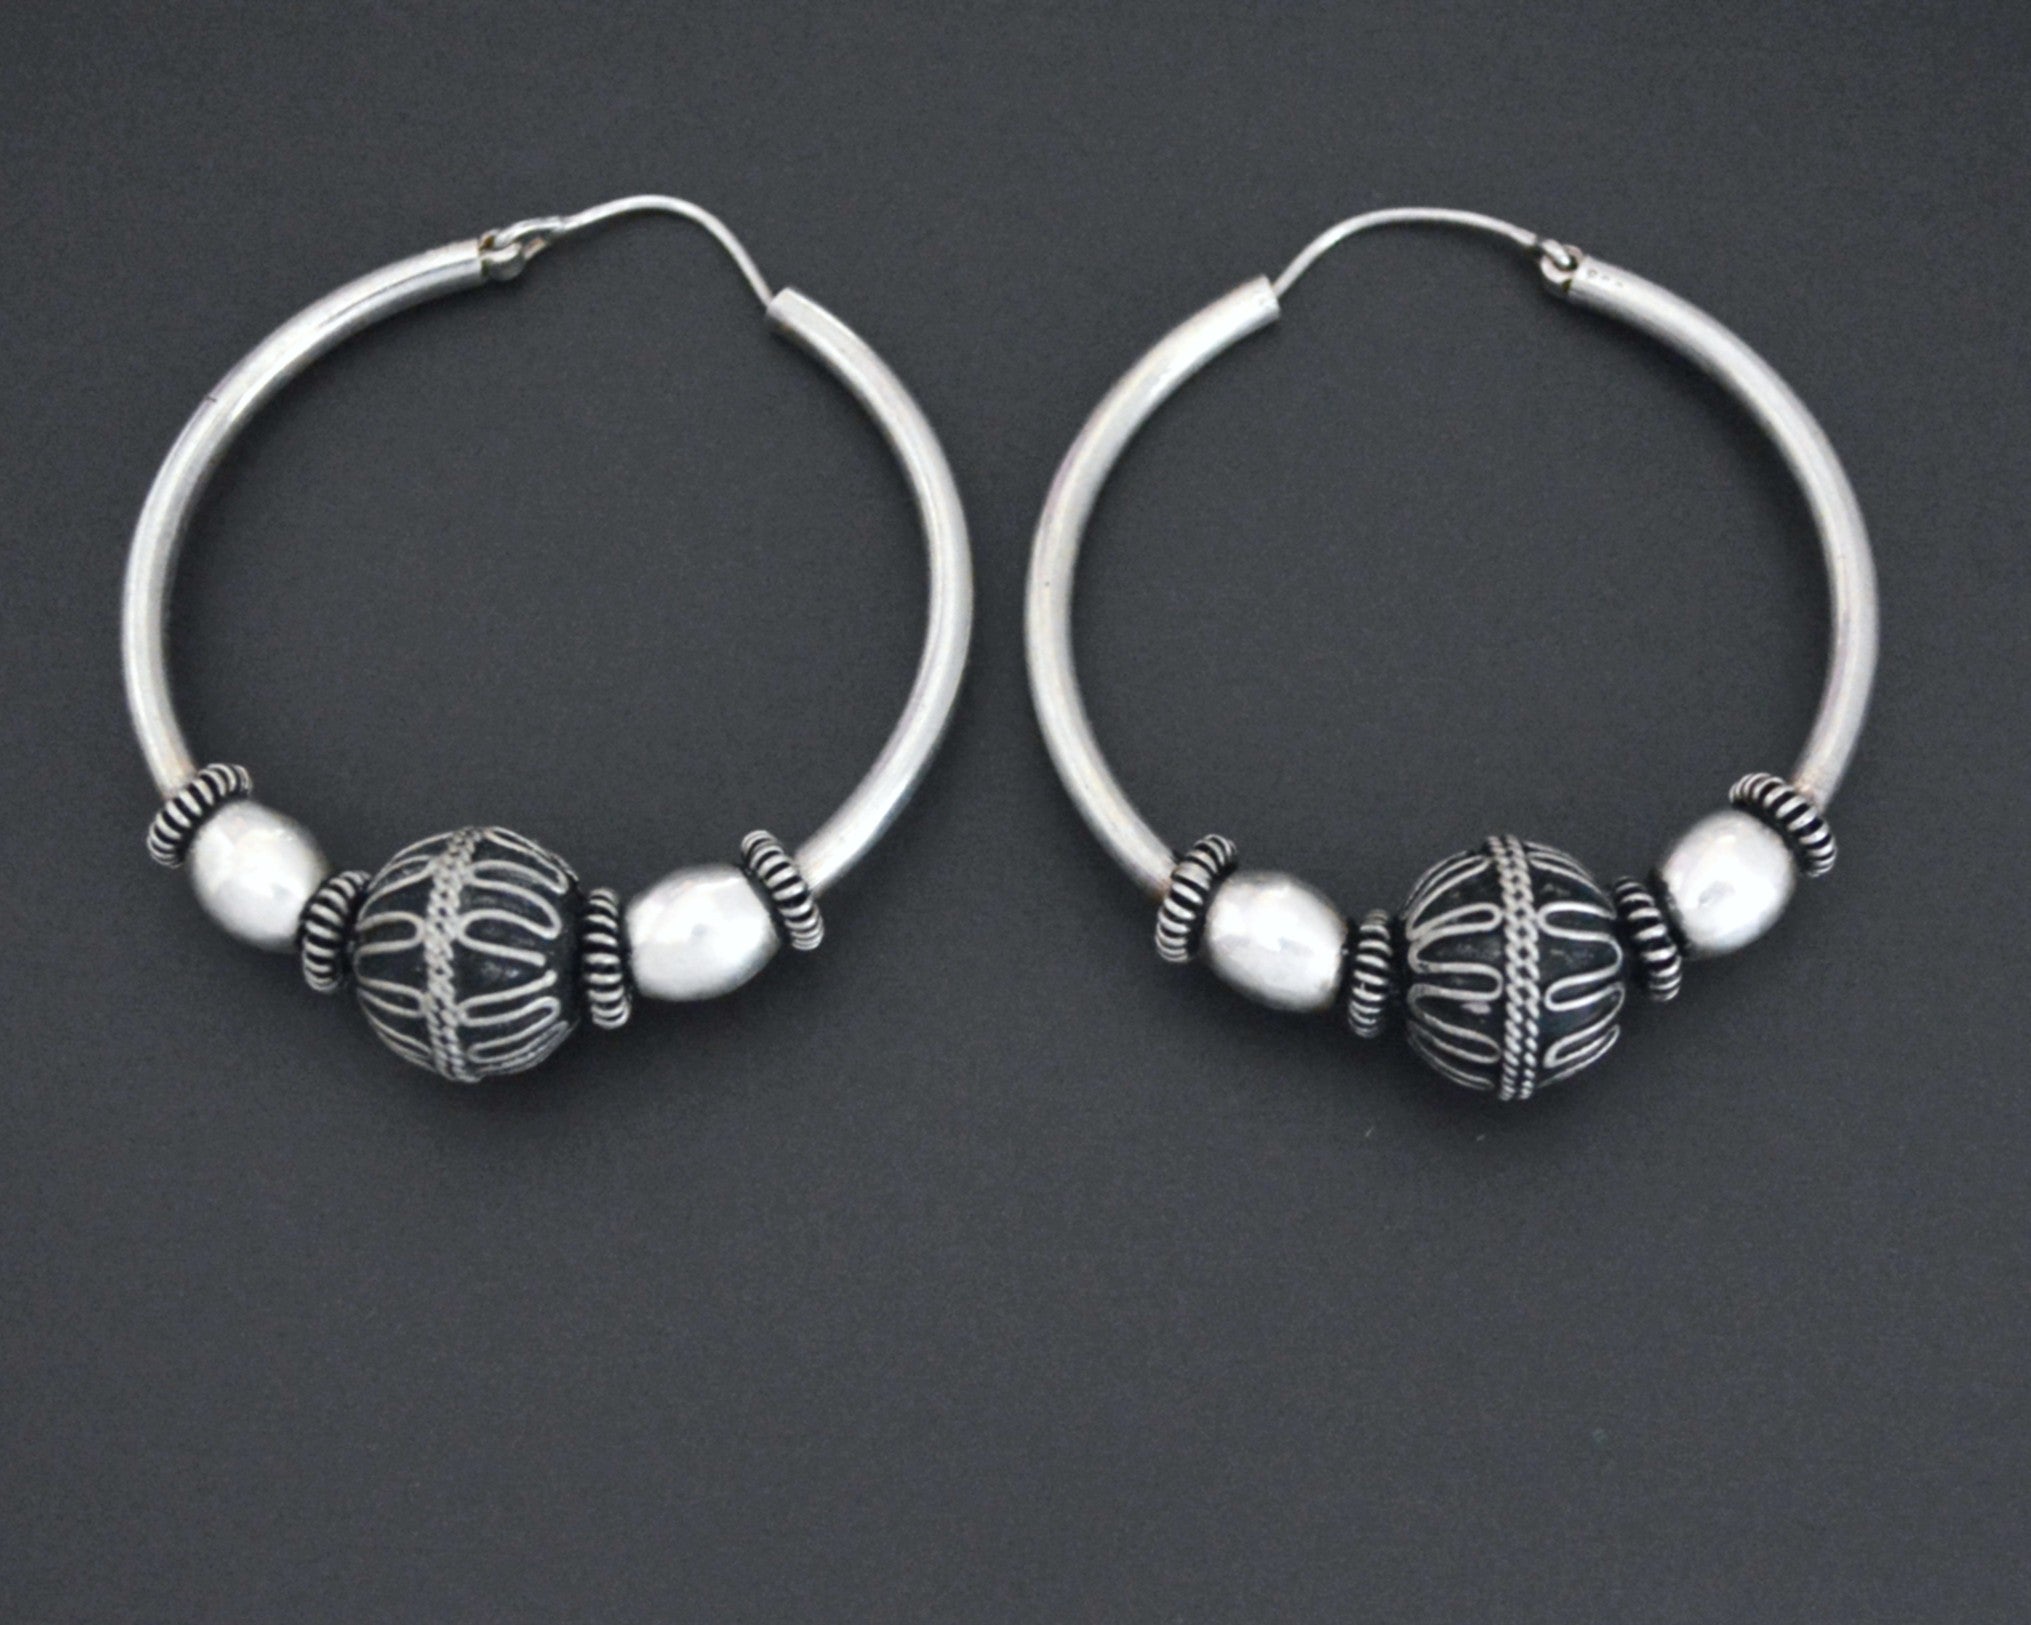 Large Ethnic Bali Hoop Earrings with Wire Work and Bead